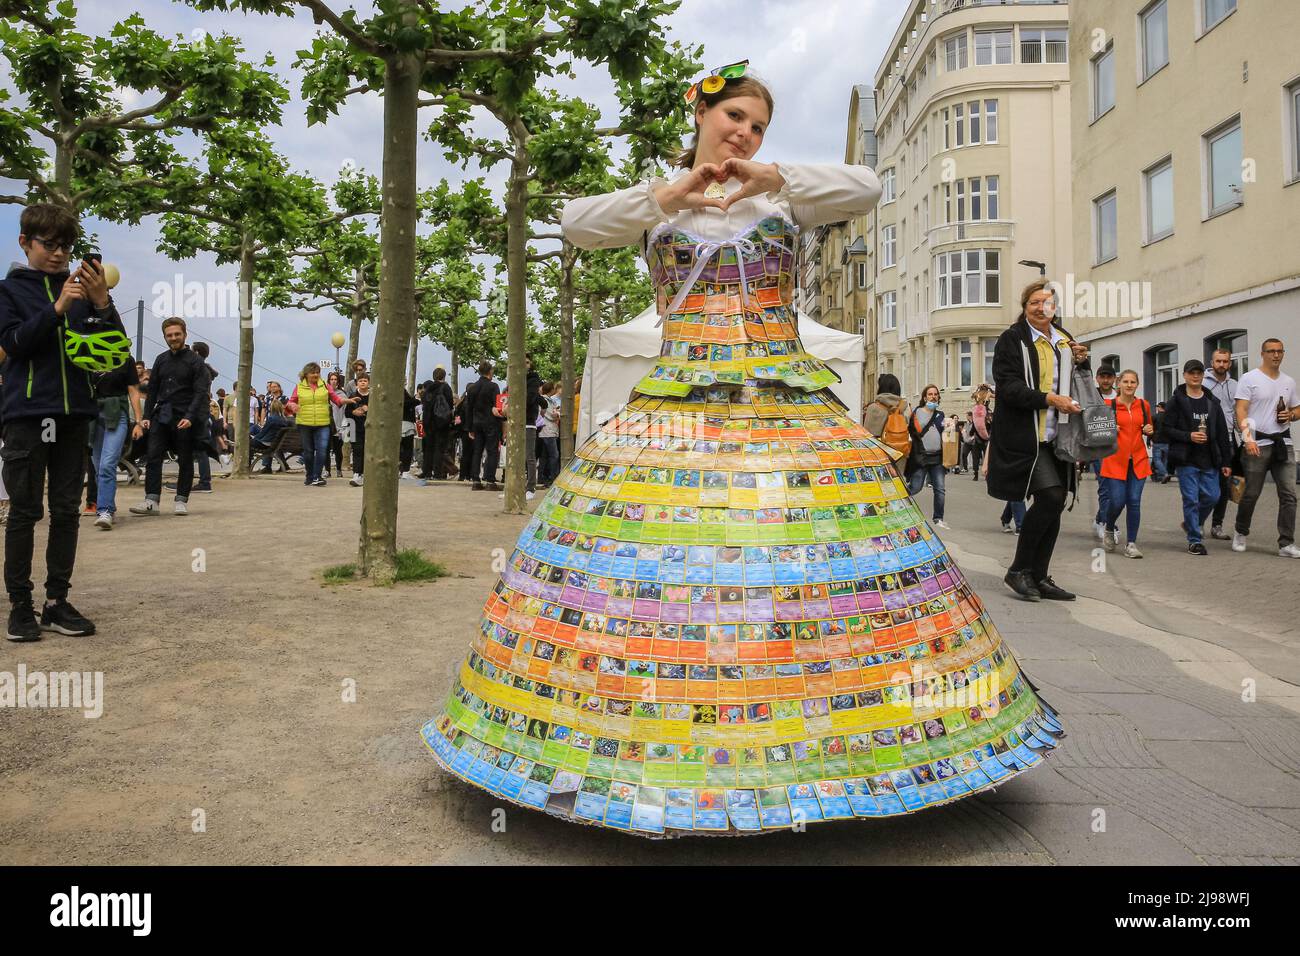 Düsseldorf, NRW, Germany. 21st May, 2022. A young woman has taken one year to complete her dress made from pokemon cards.Tens of thousands of visitors and cosplayers enjoy the warm sunshine along the river Rhine embankment in their outfits inspired by Japanese anime, video and games. Stage performances, cosplay, stalls and demonstrations of Japanese culture, sports and traditions are featured at Düsseldorf's annual Japan Day, celebrating Japan and the Japanese community in the city. Düsseldorf is home to the largest Japanese community in Germany. Credit: Imageplotter/Alamy Live News Stock Photo